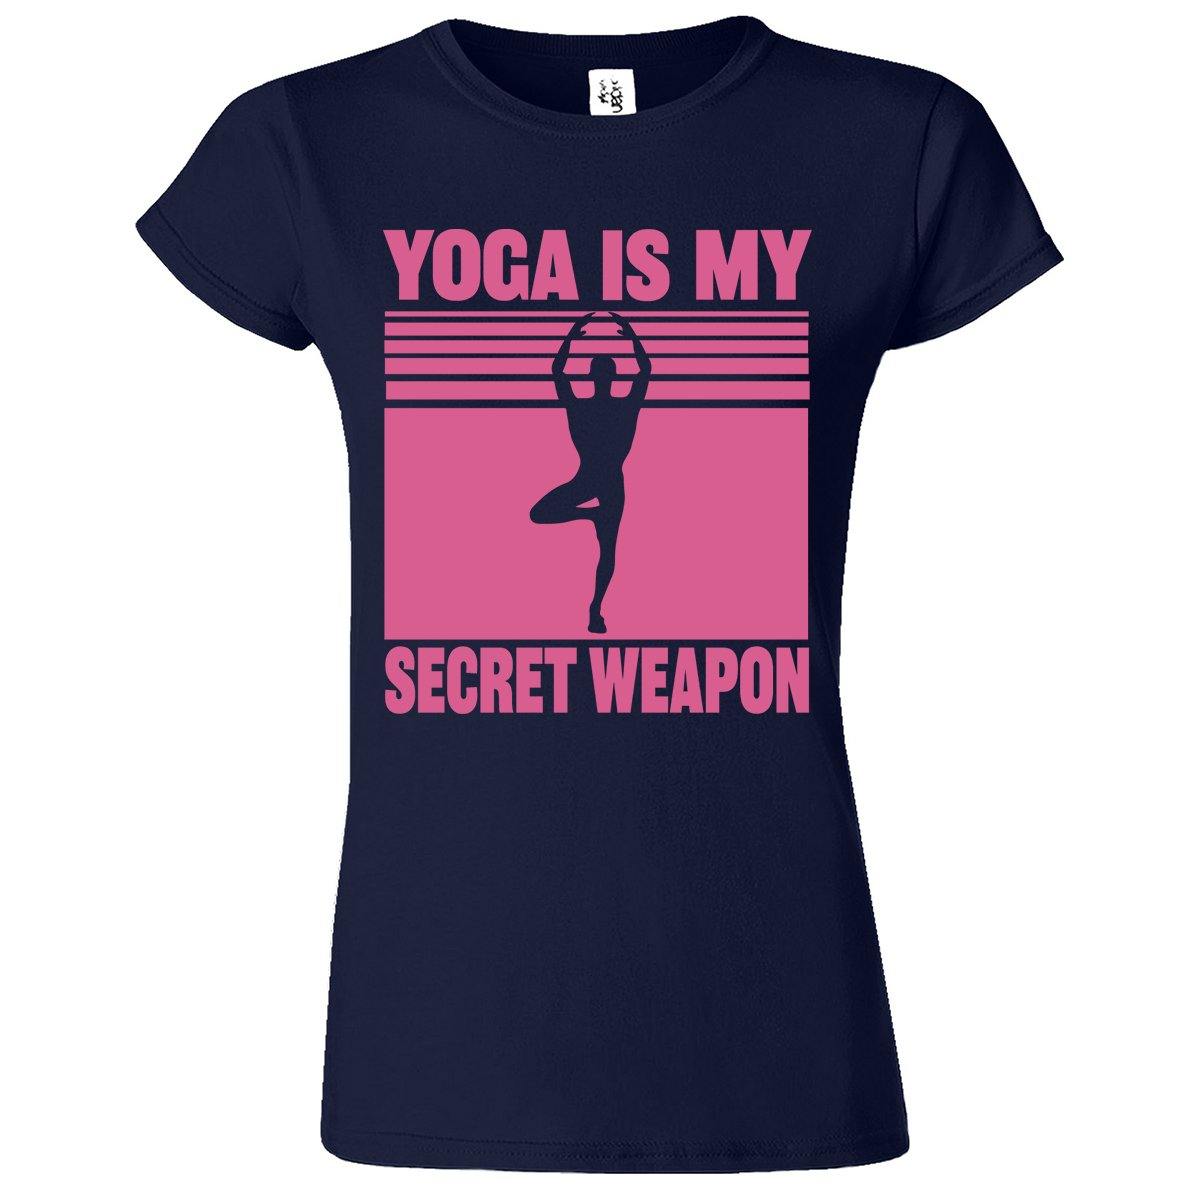 Yoga Is My Secret Weapon Printed T-Shirt for Women's - ApparelinClick